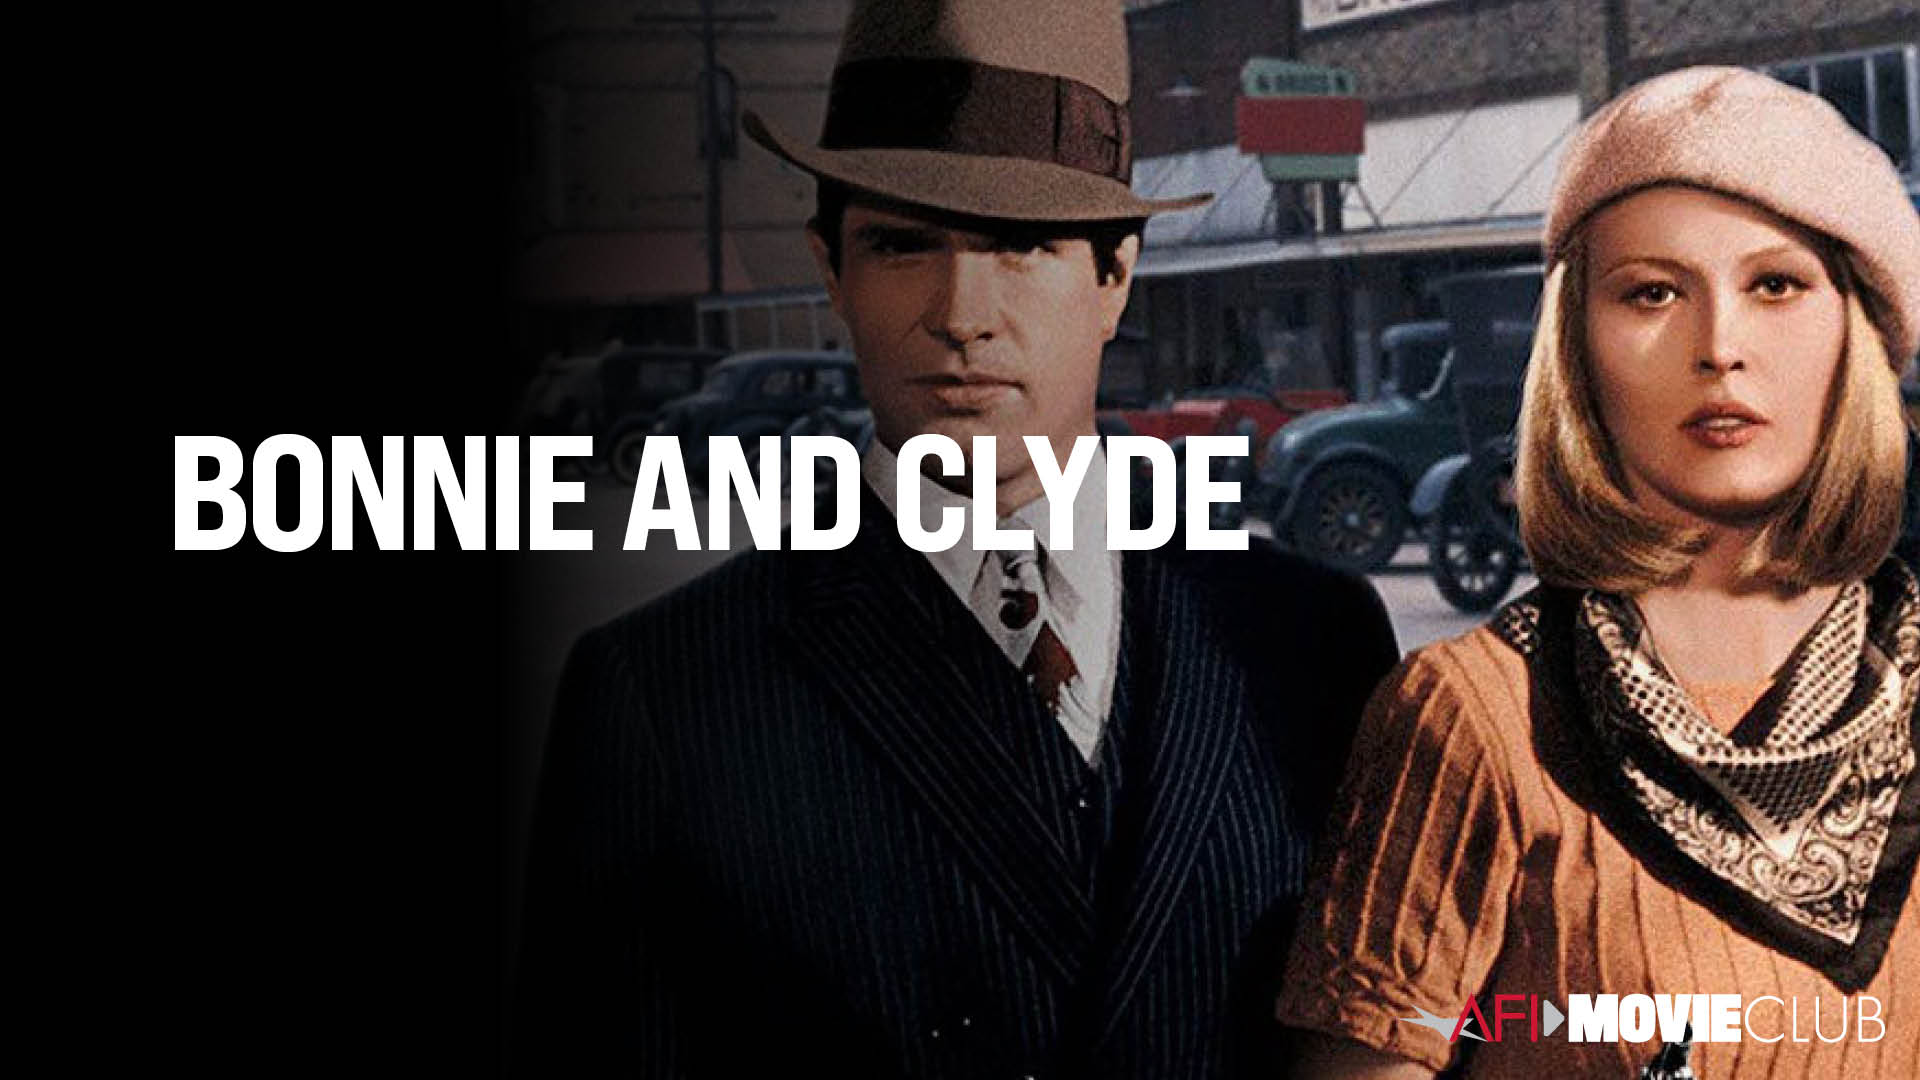 Bonnie and Clyde - Faye Dunaway and Warren Beatty